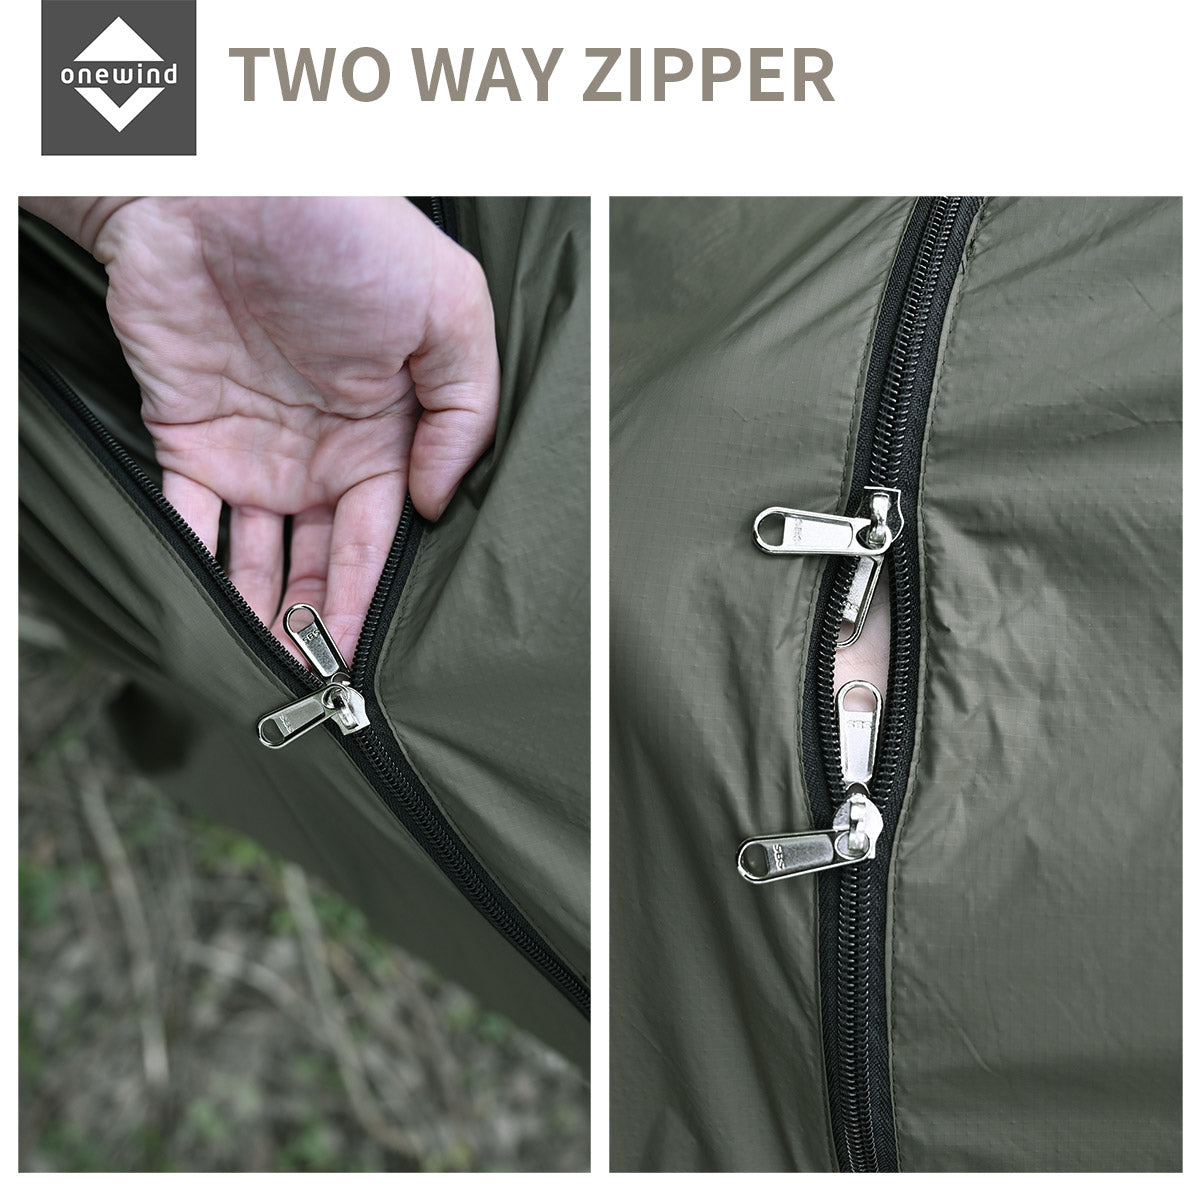 Hammock Zippered Windsock Features | Onewind Outdoors